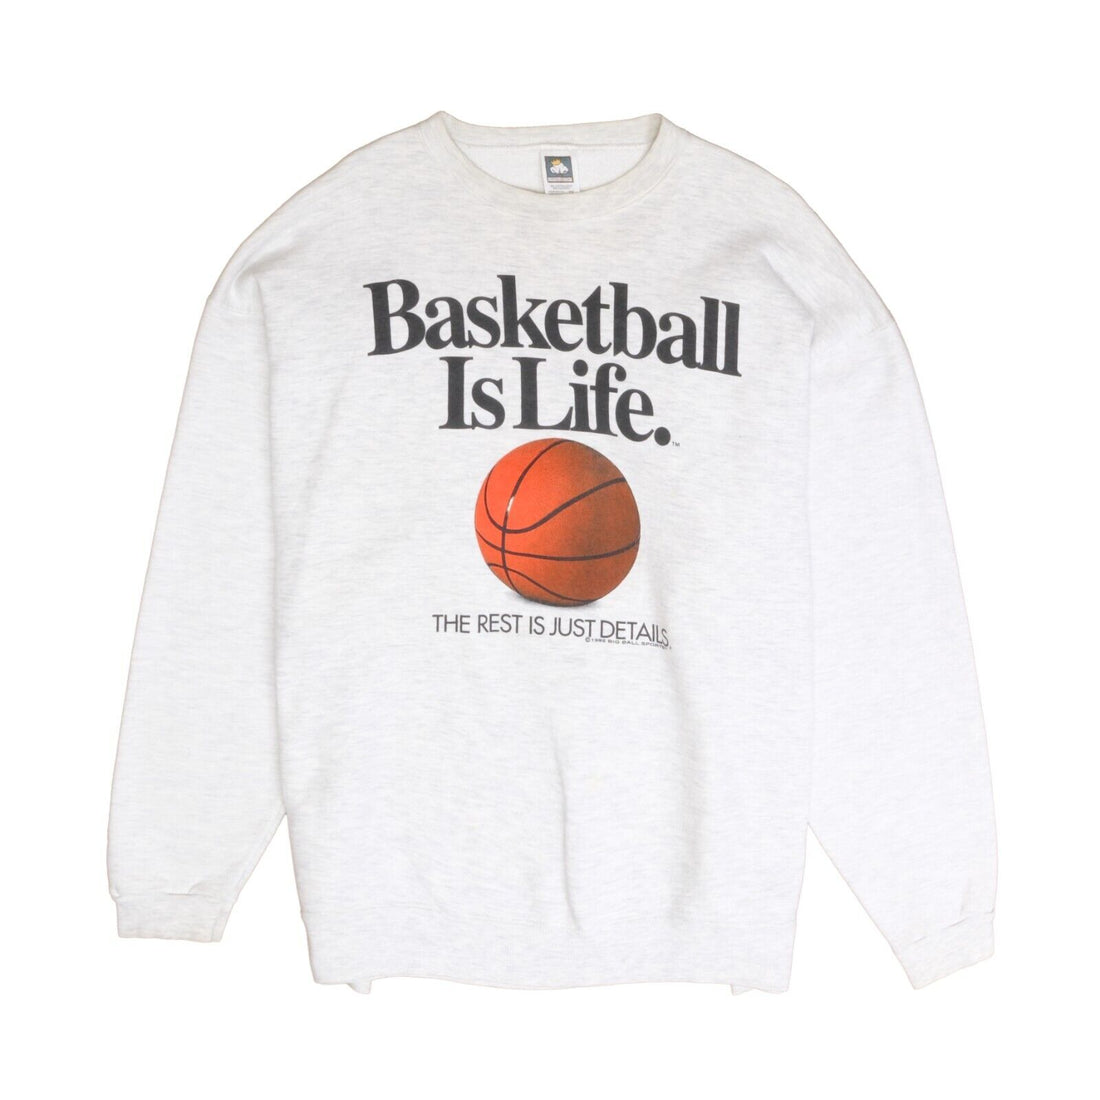 Vintage Basketball Is Life The Rest Is Just Details Sweatshirt Size 2XL 1992 90s